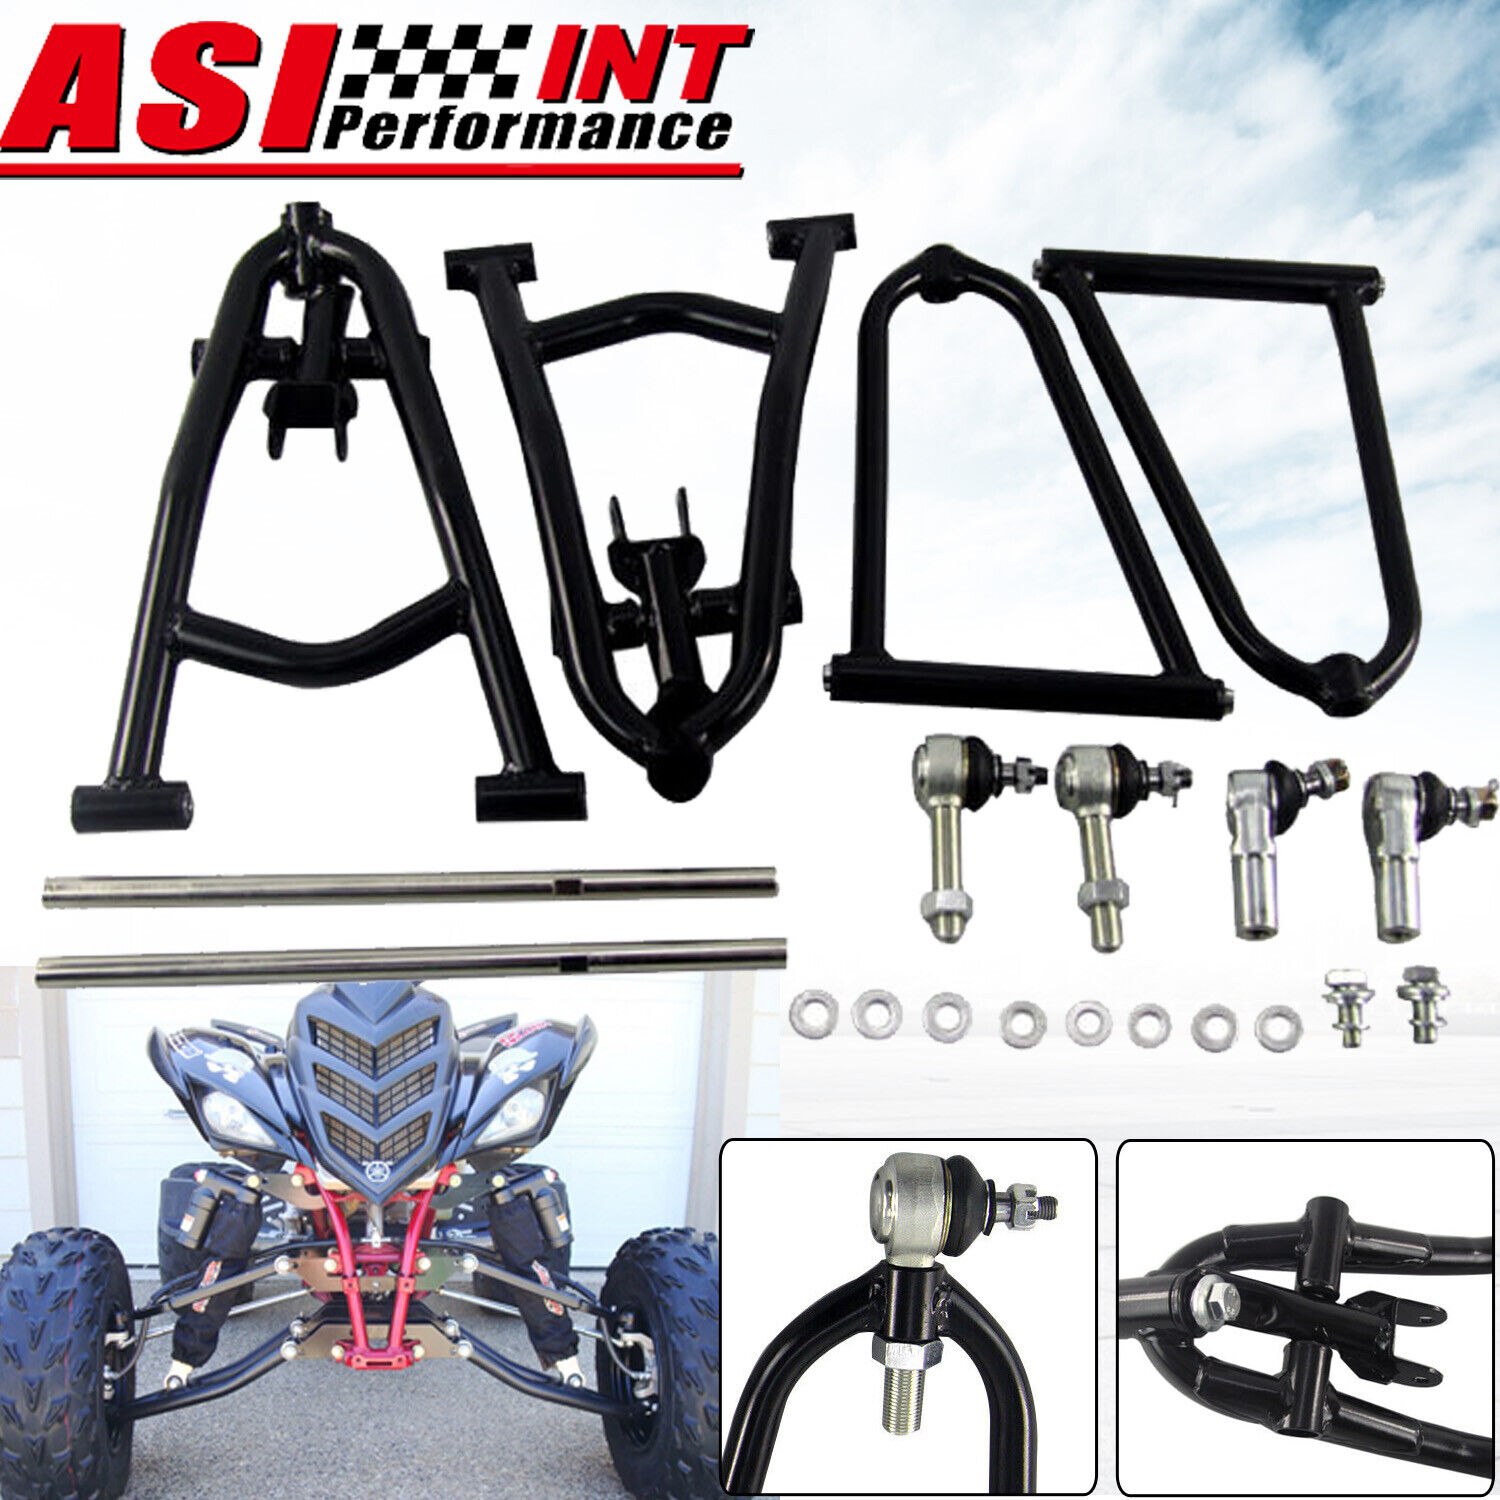 FRONT Extended A-ARMS+2 +1 WIDER FIT 2009+ YAMAHA RAPTOR 700 YFM700R